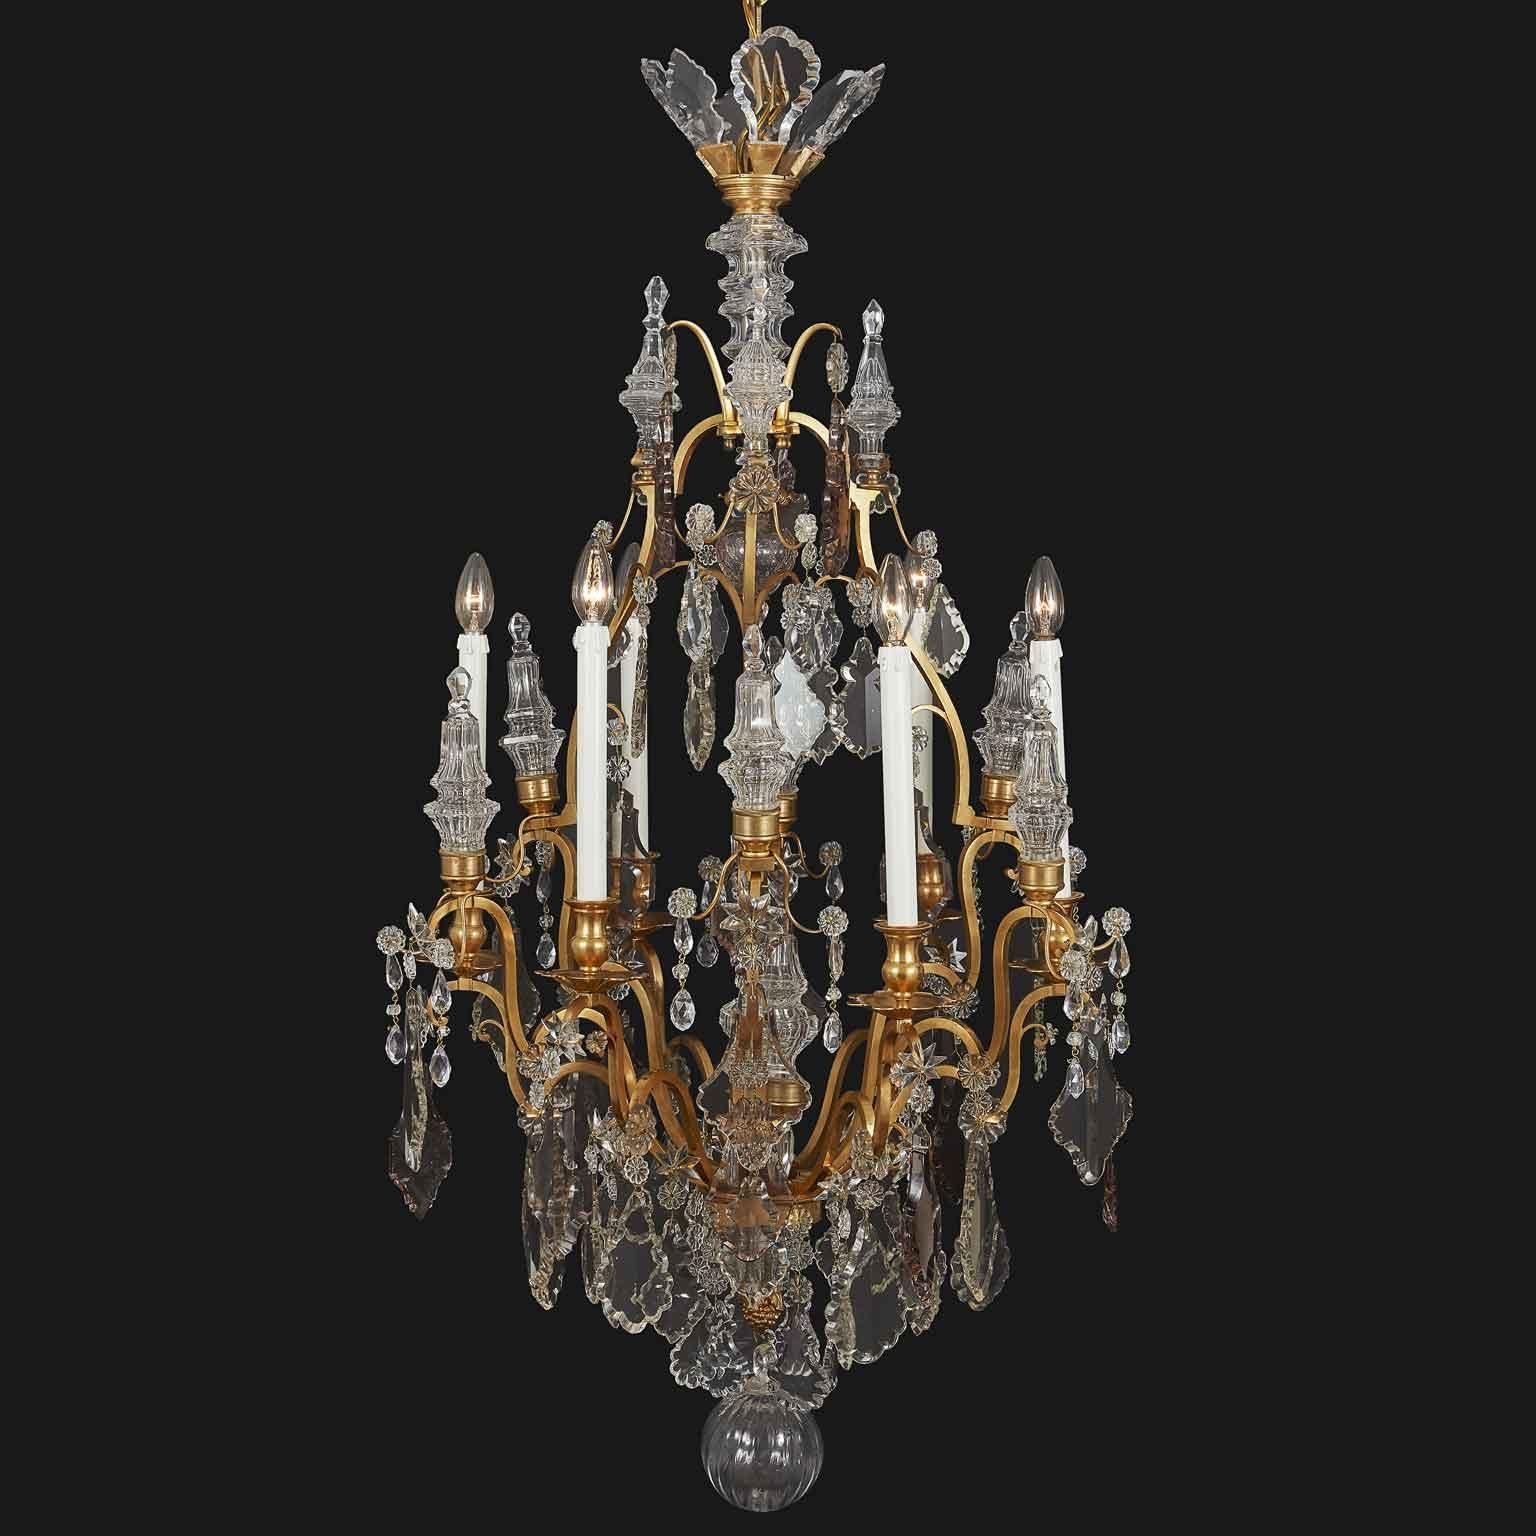 Early 20th Century French Birdcage Chandelier Ormolu with Crystal Spires For Sale 3